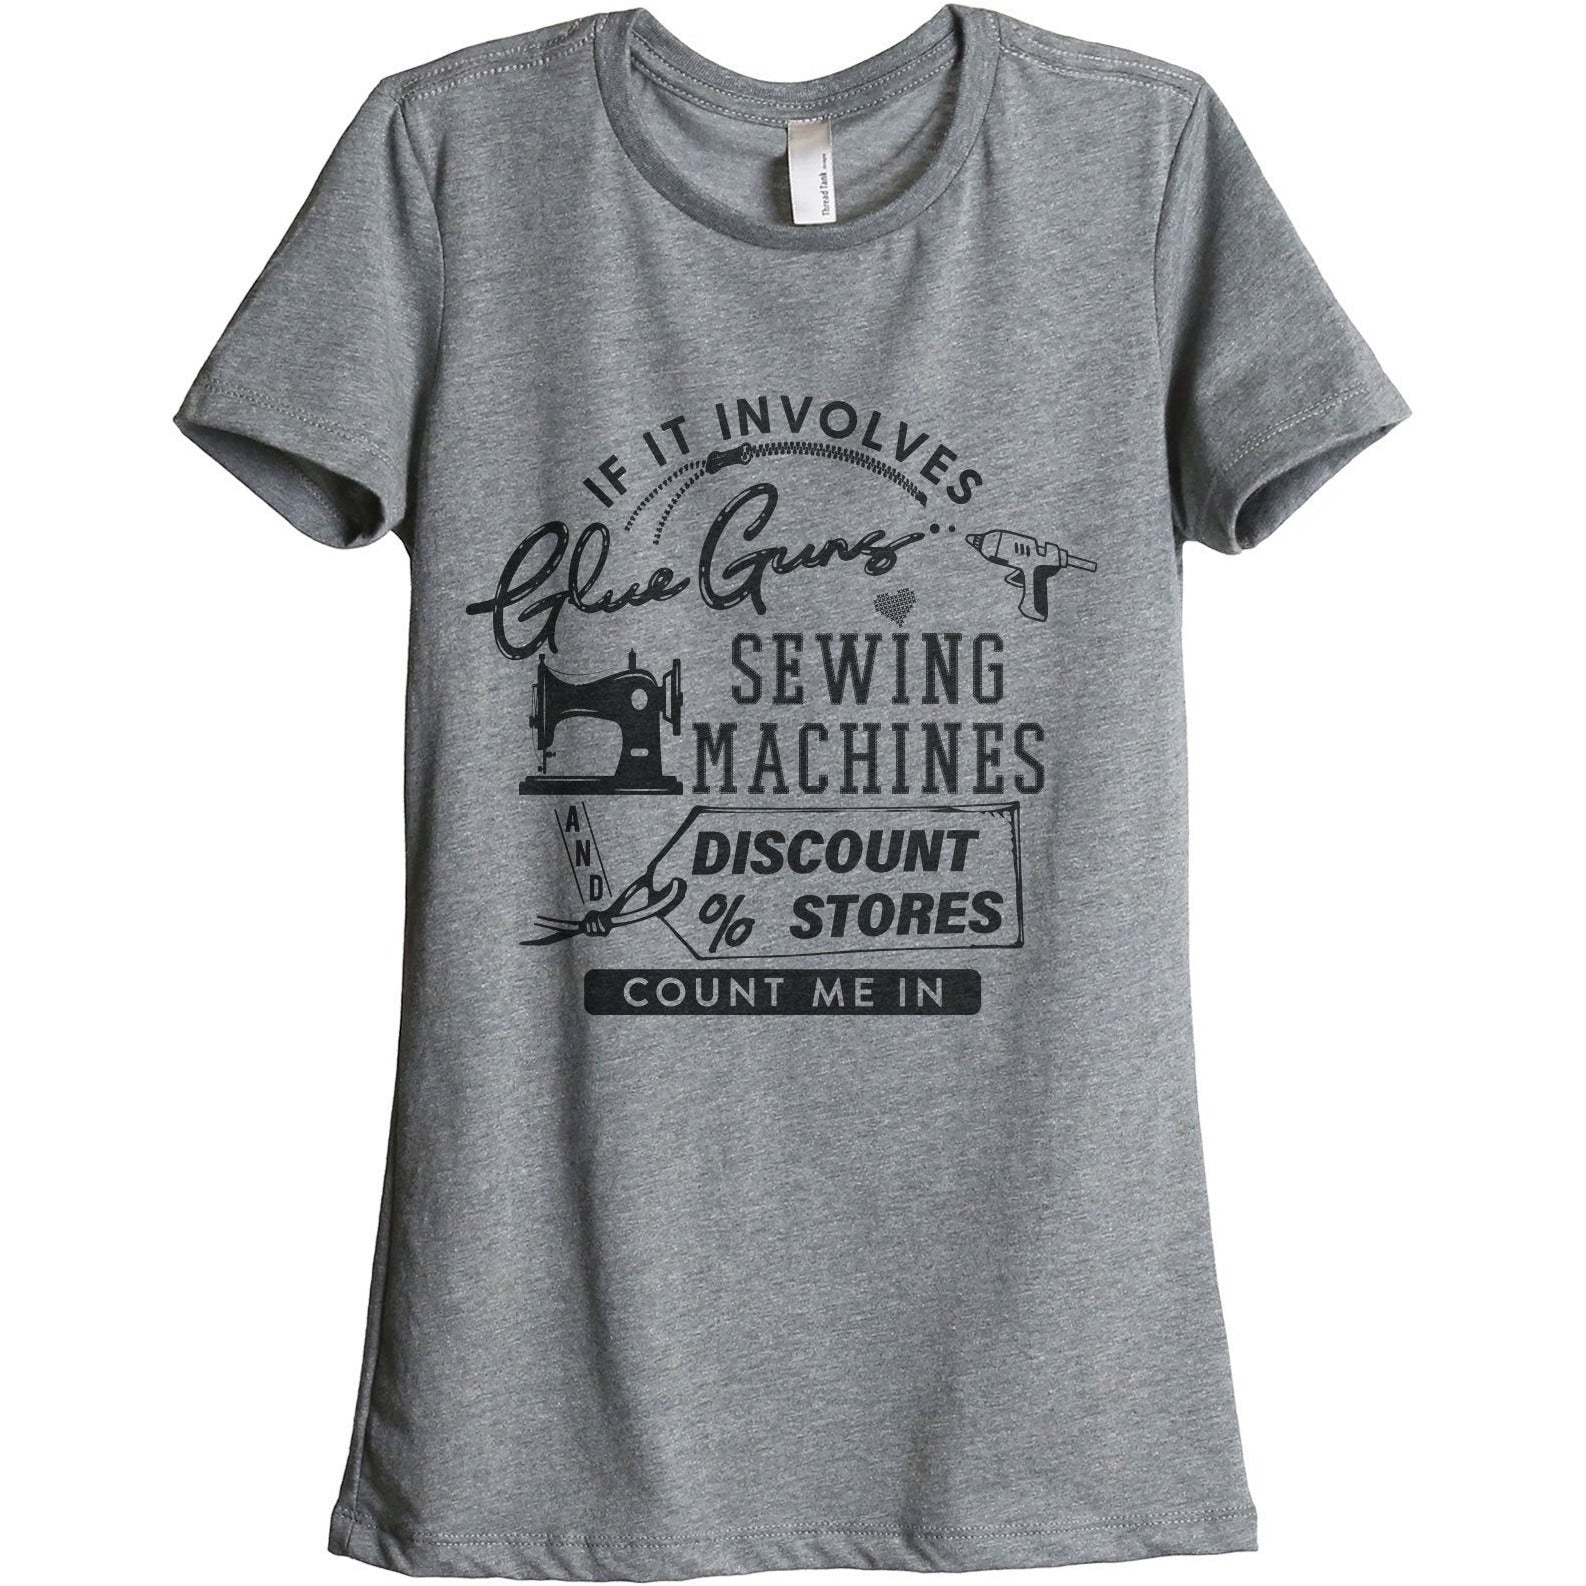 Glue Guns Sewing Machines And Discount Stores Women's Relaxed Crewneck T-Shirt Top Tee Heather Grey